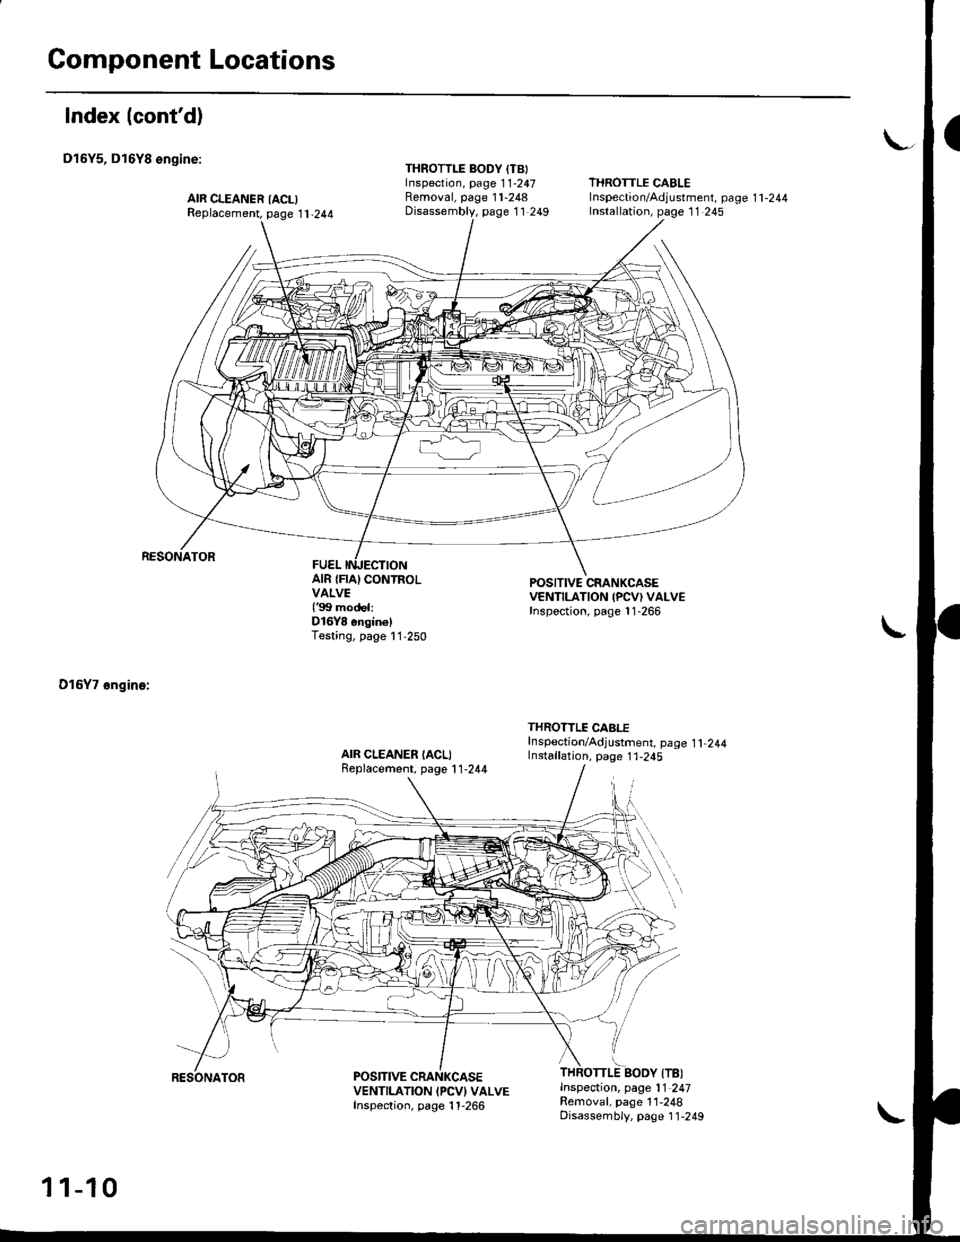 HONDA CIVIC 1996 6.G Workshop Manual Component Locations
Index (contd)
D16Y5, D16Y8 ongine:
RESONATOR
D16Y7 6ngin€:
AIR CLEANER IACLIReplacement, page 11-244
THROTTLE BODY (TBIInspection, page 1 1-247Removal, page 11-248Disassembly, p